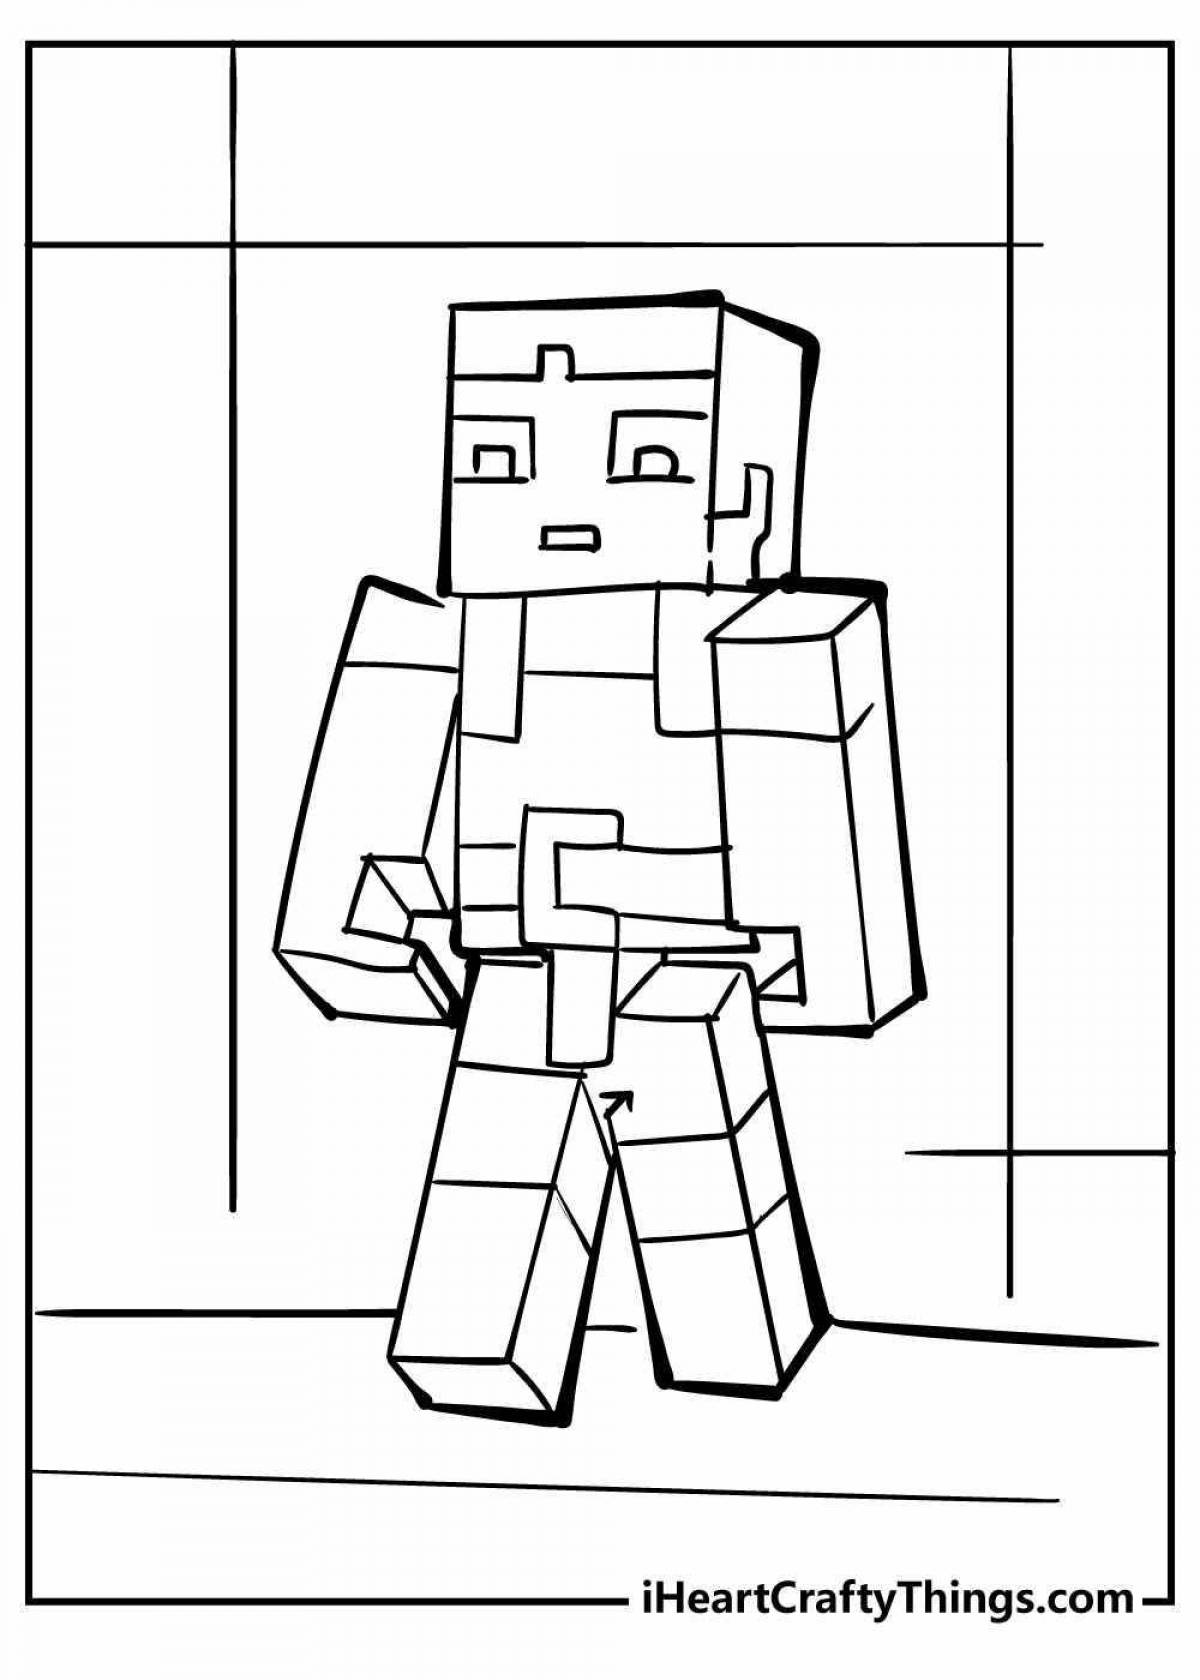 Fascinating minecraft dolphin coloring page